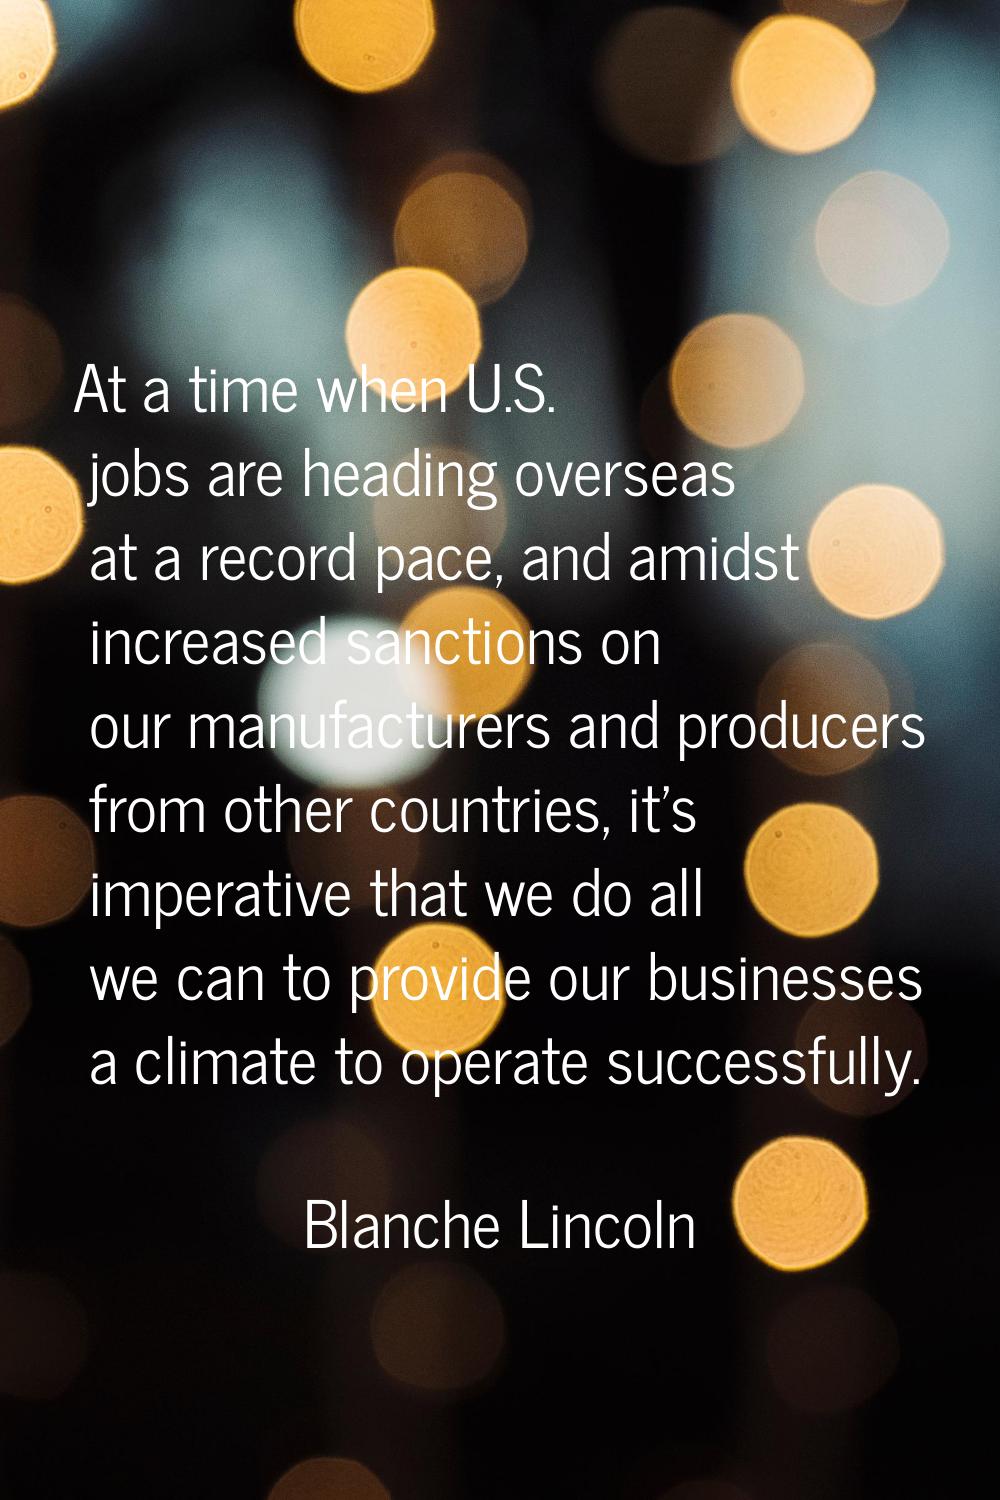 At a time when U.S. jobs are heading overseas at a record pace, and amidst increased sanctions on o